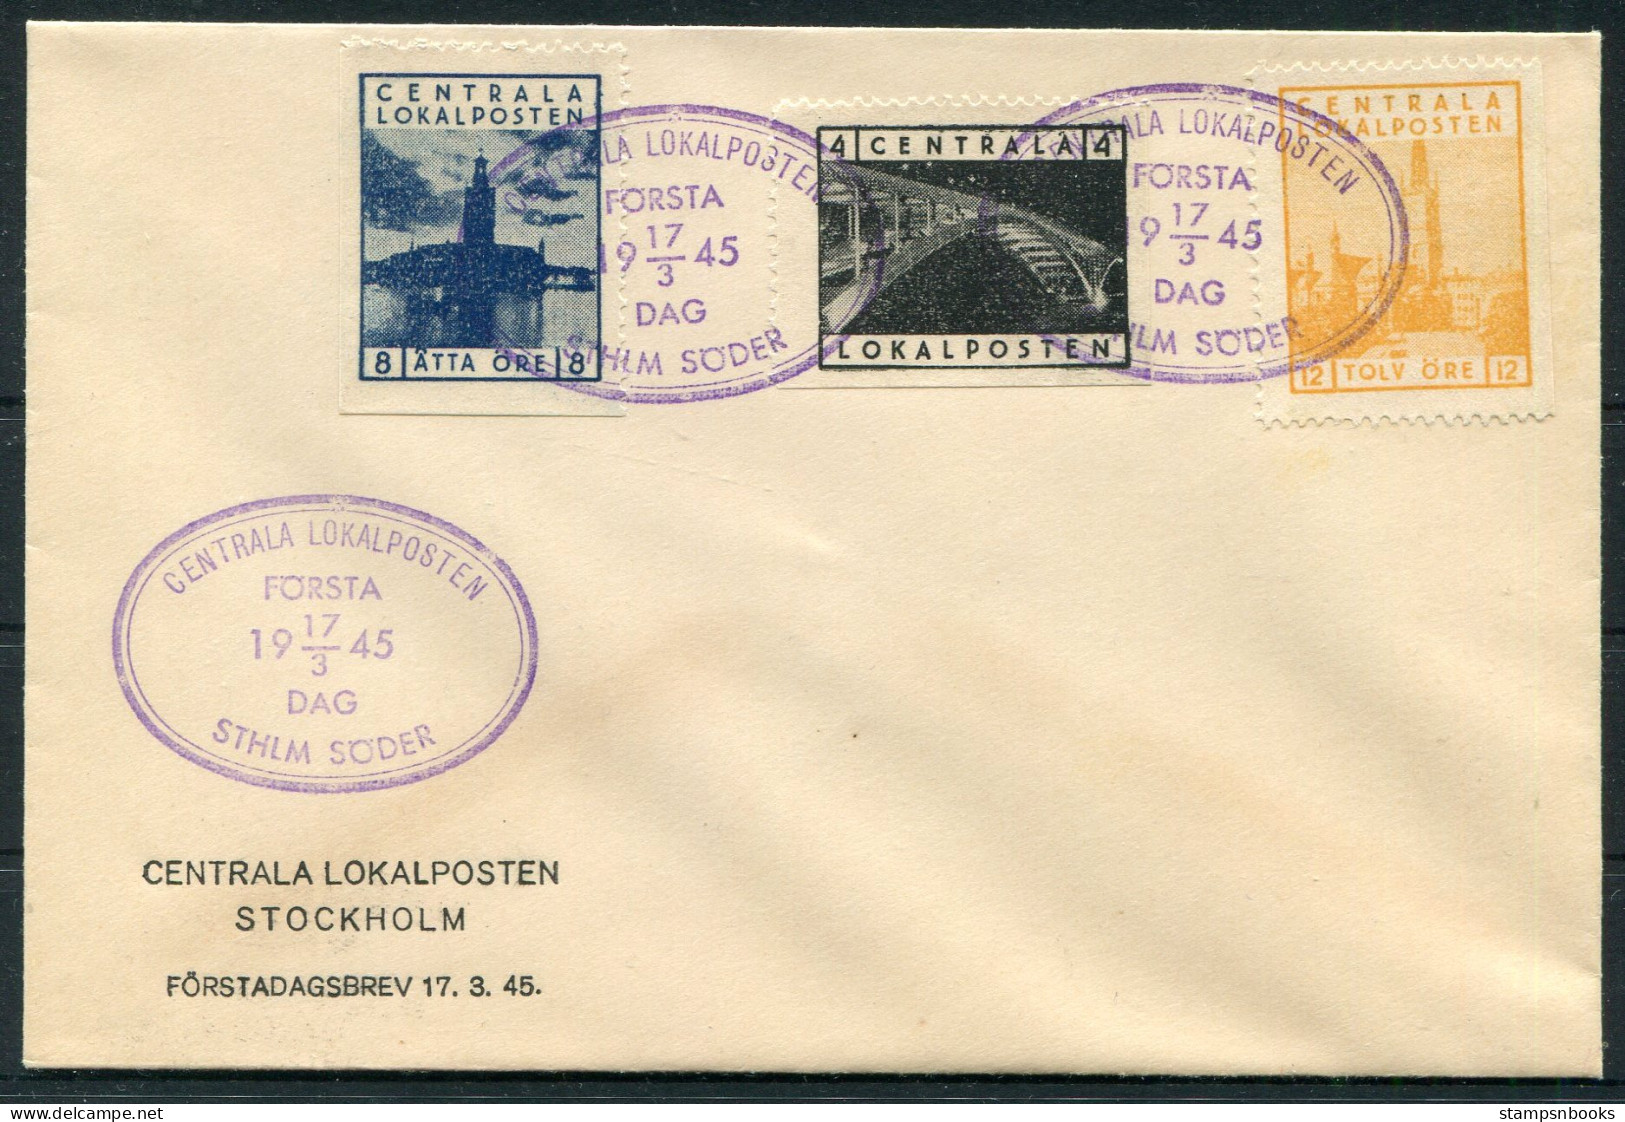 1945 Sweden Stockholm Centrala Lokalposten First Day Cover, Local Post FDC - Local Post Stamps